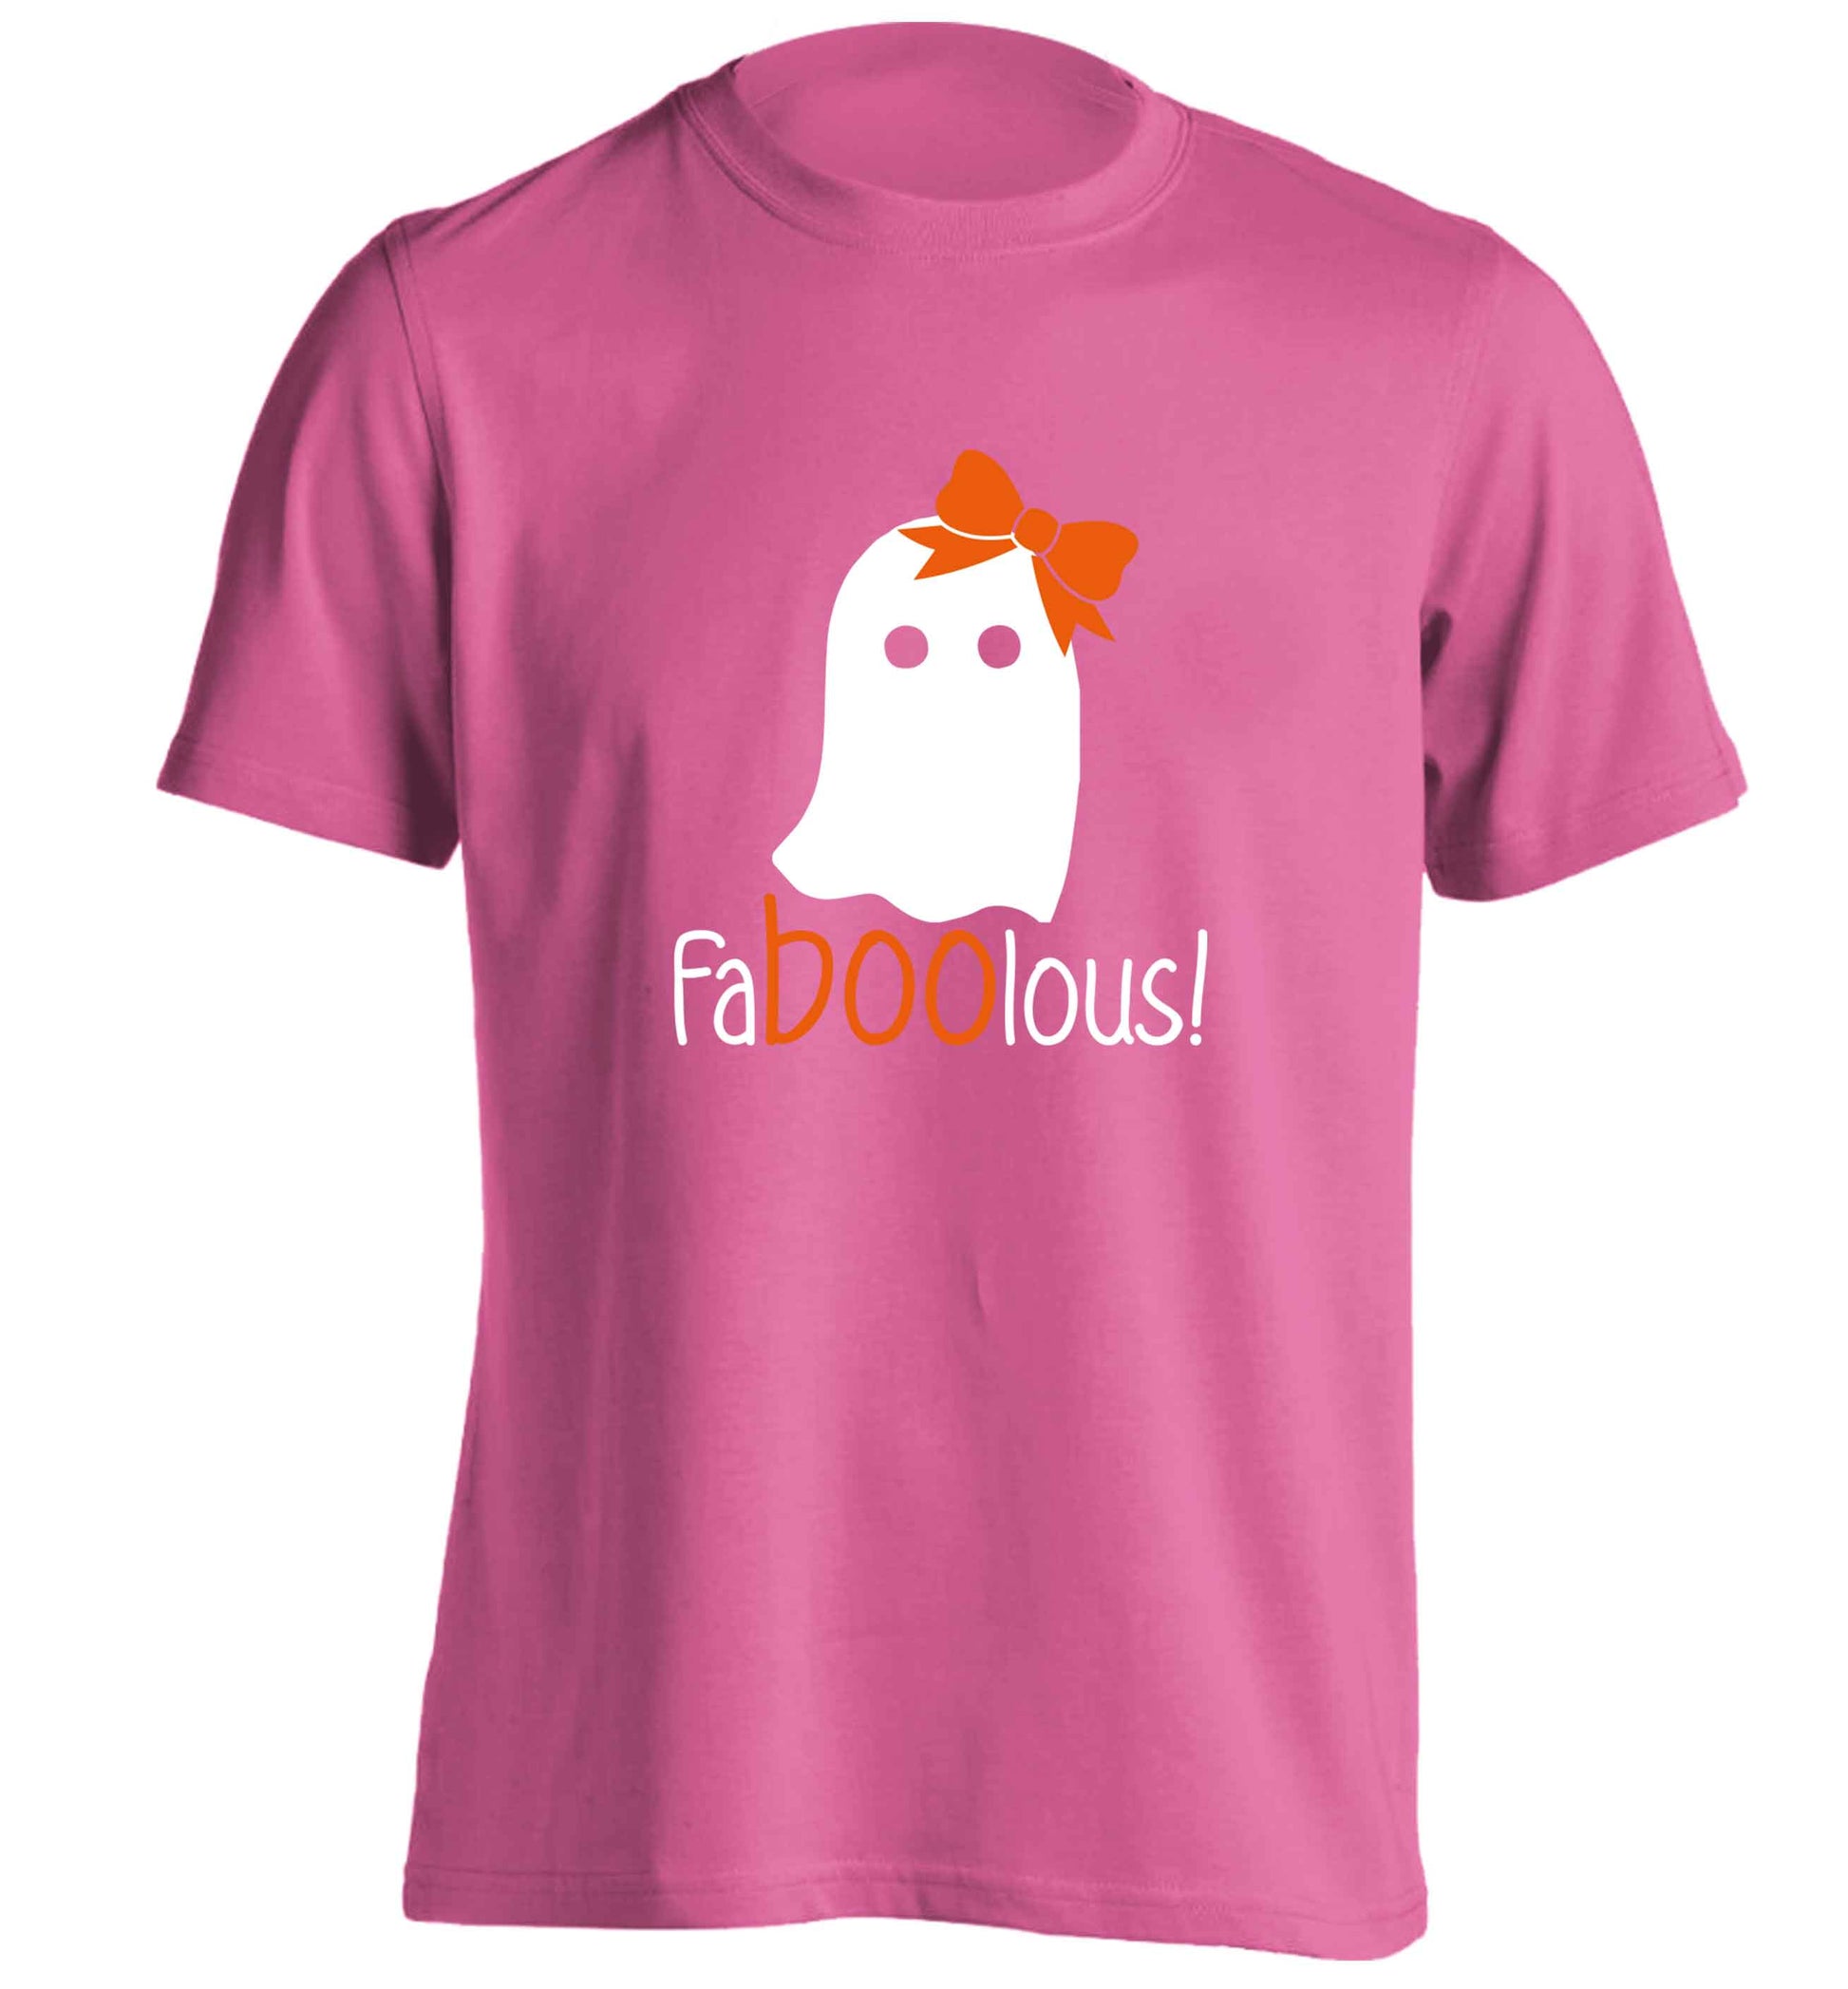 Faboolous ghost adults unisex pink Tshirt 2XL